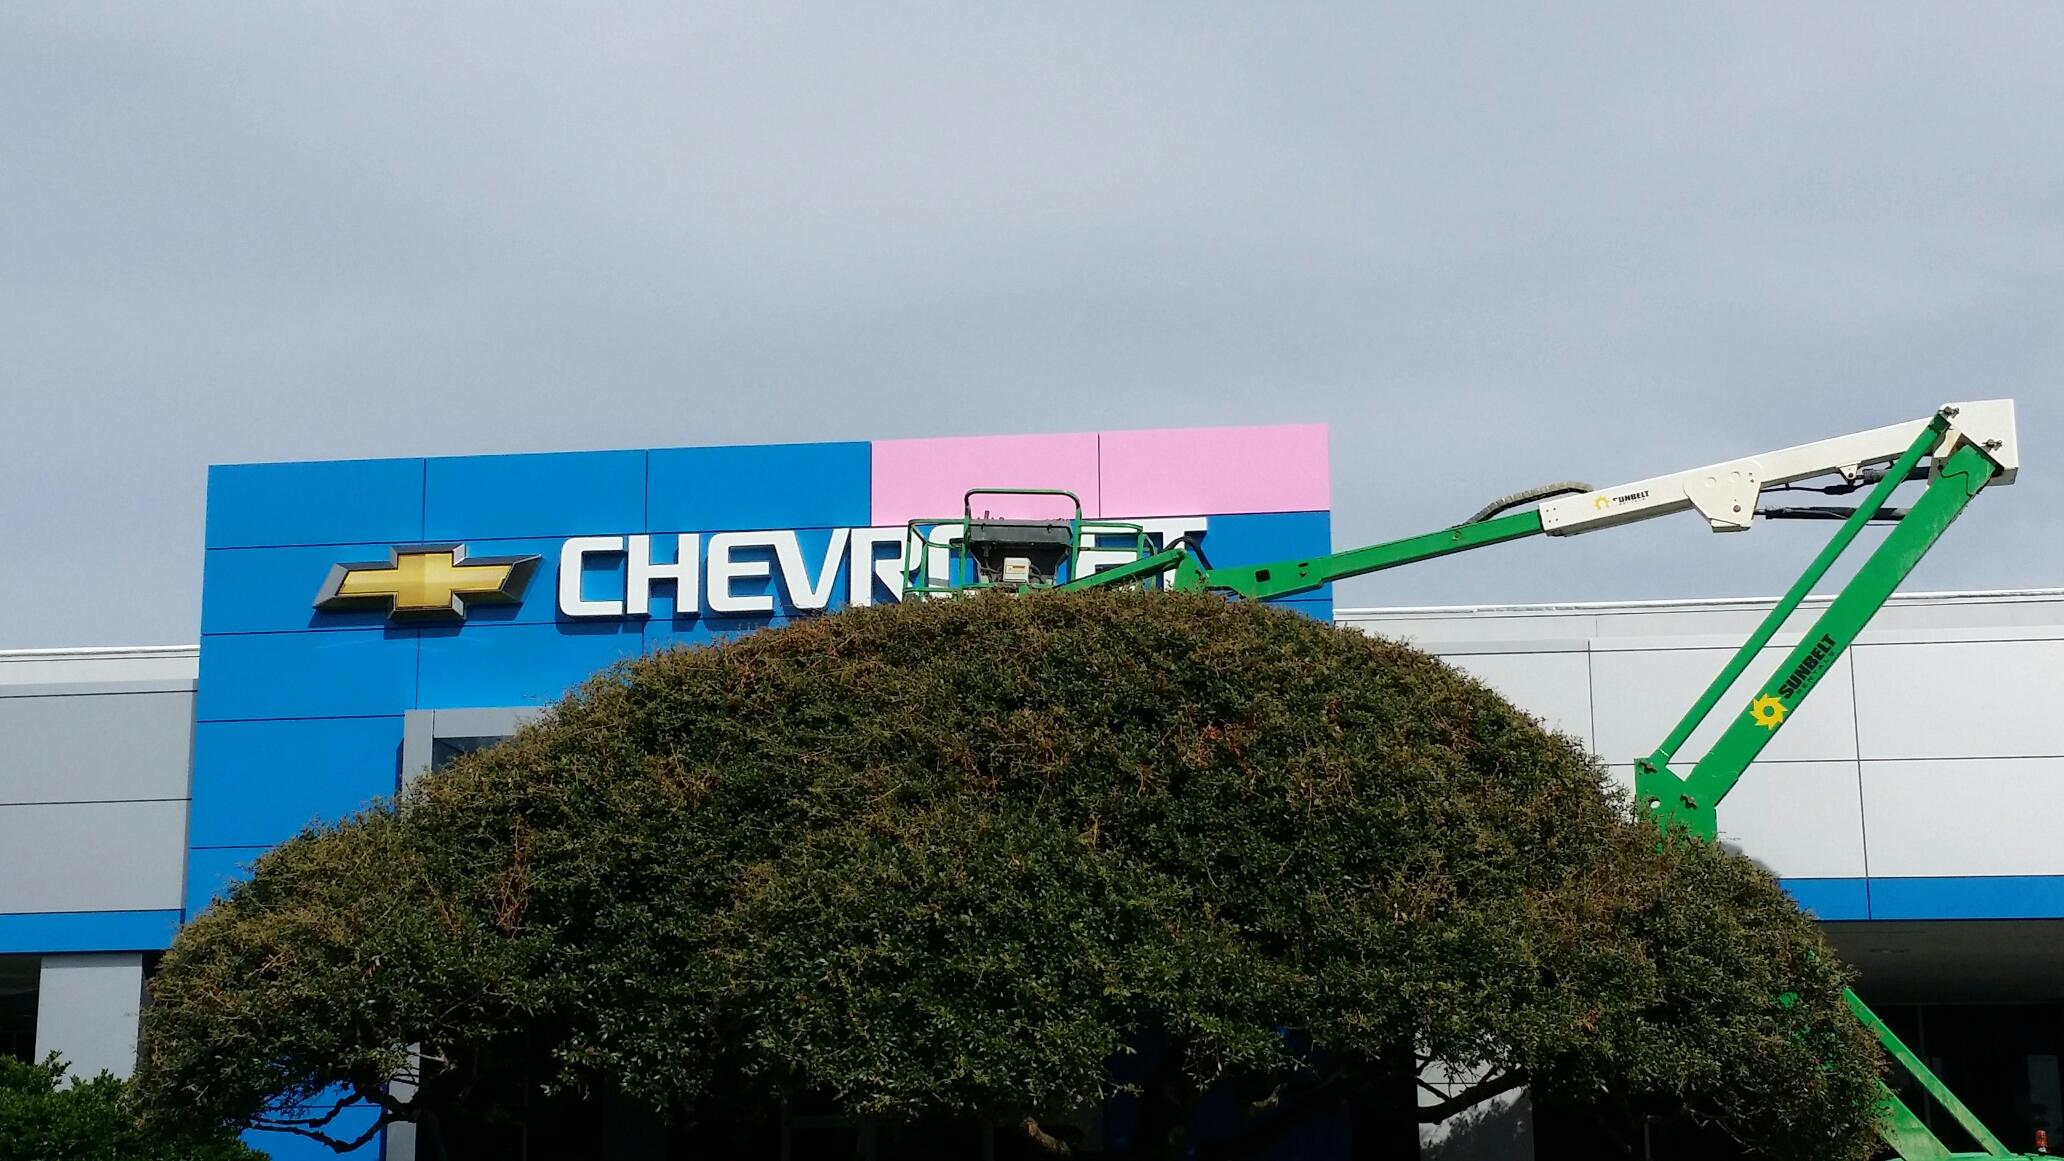 Dimmitt Chevrolet goes pink for Breast Cancer Awareness